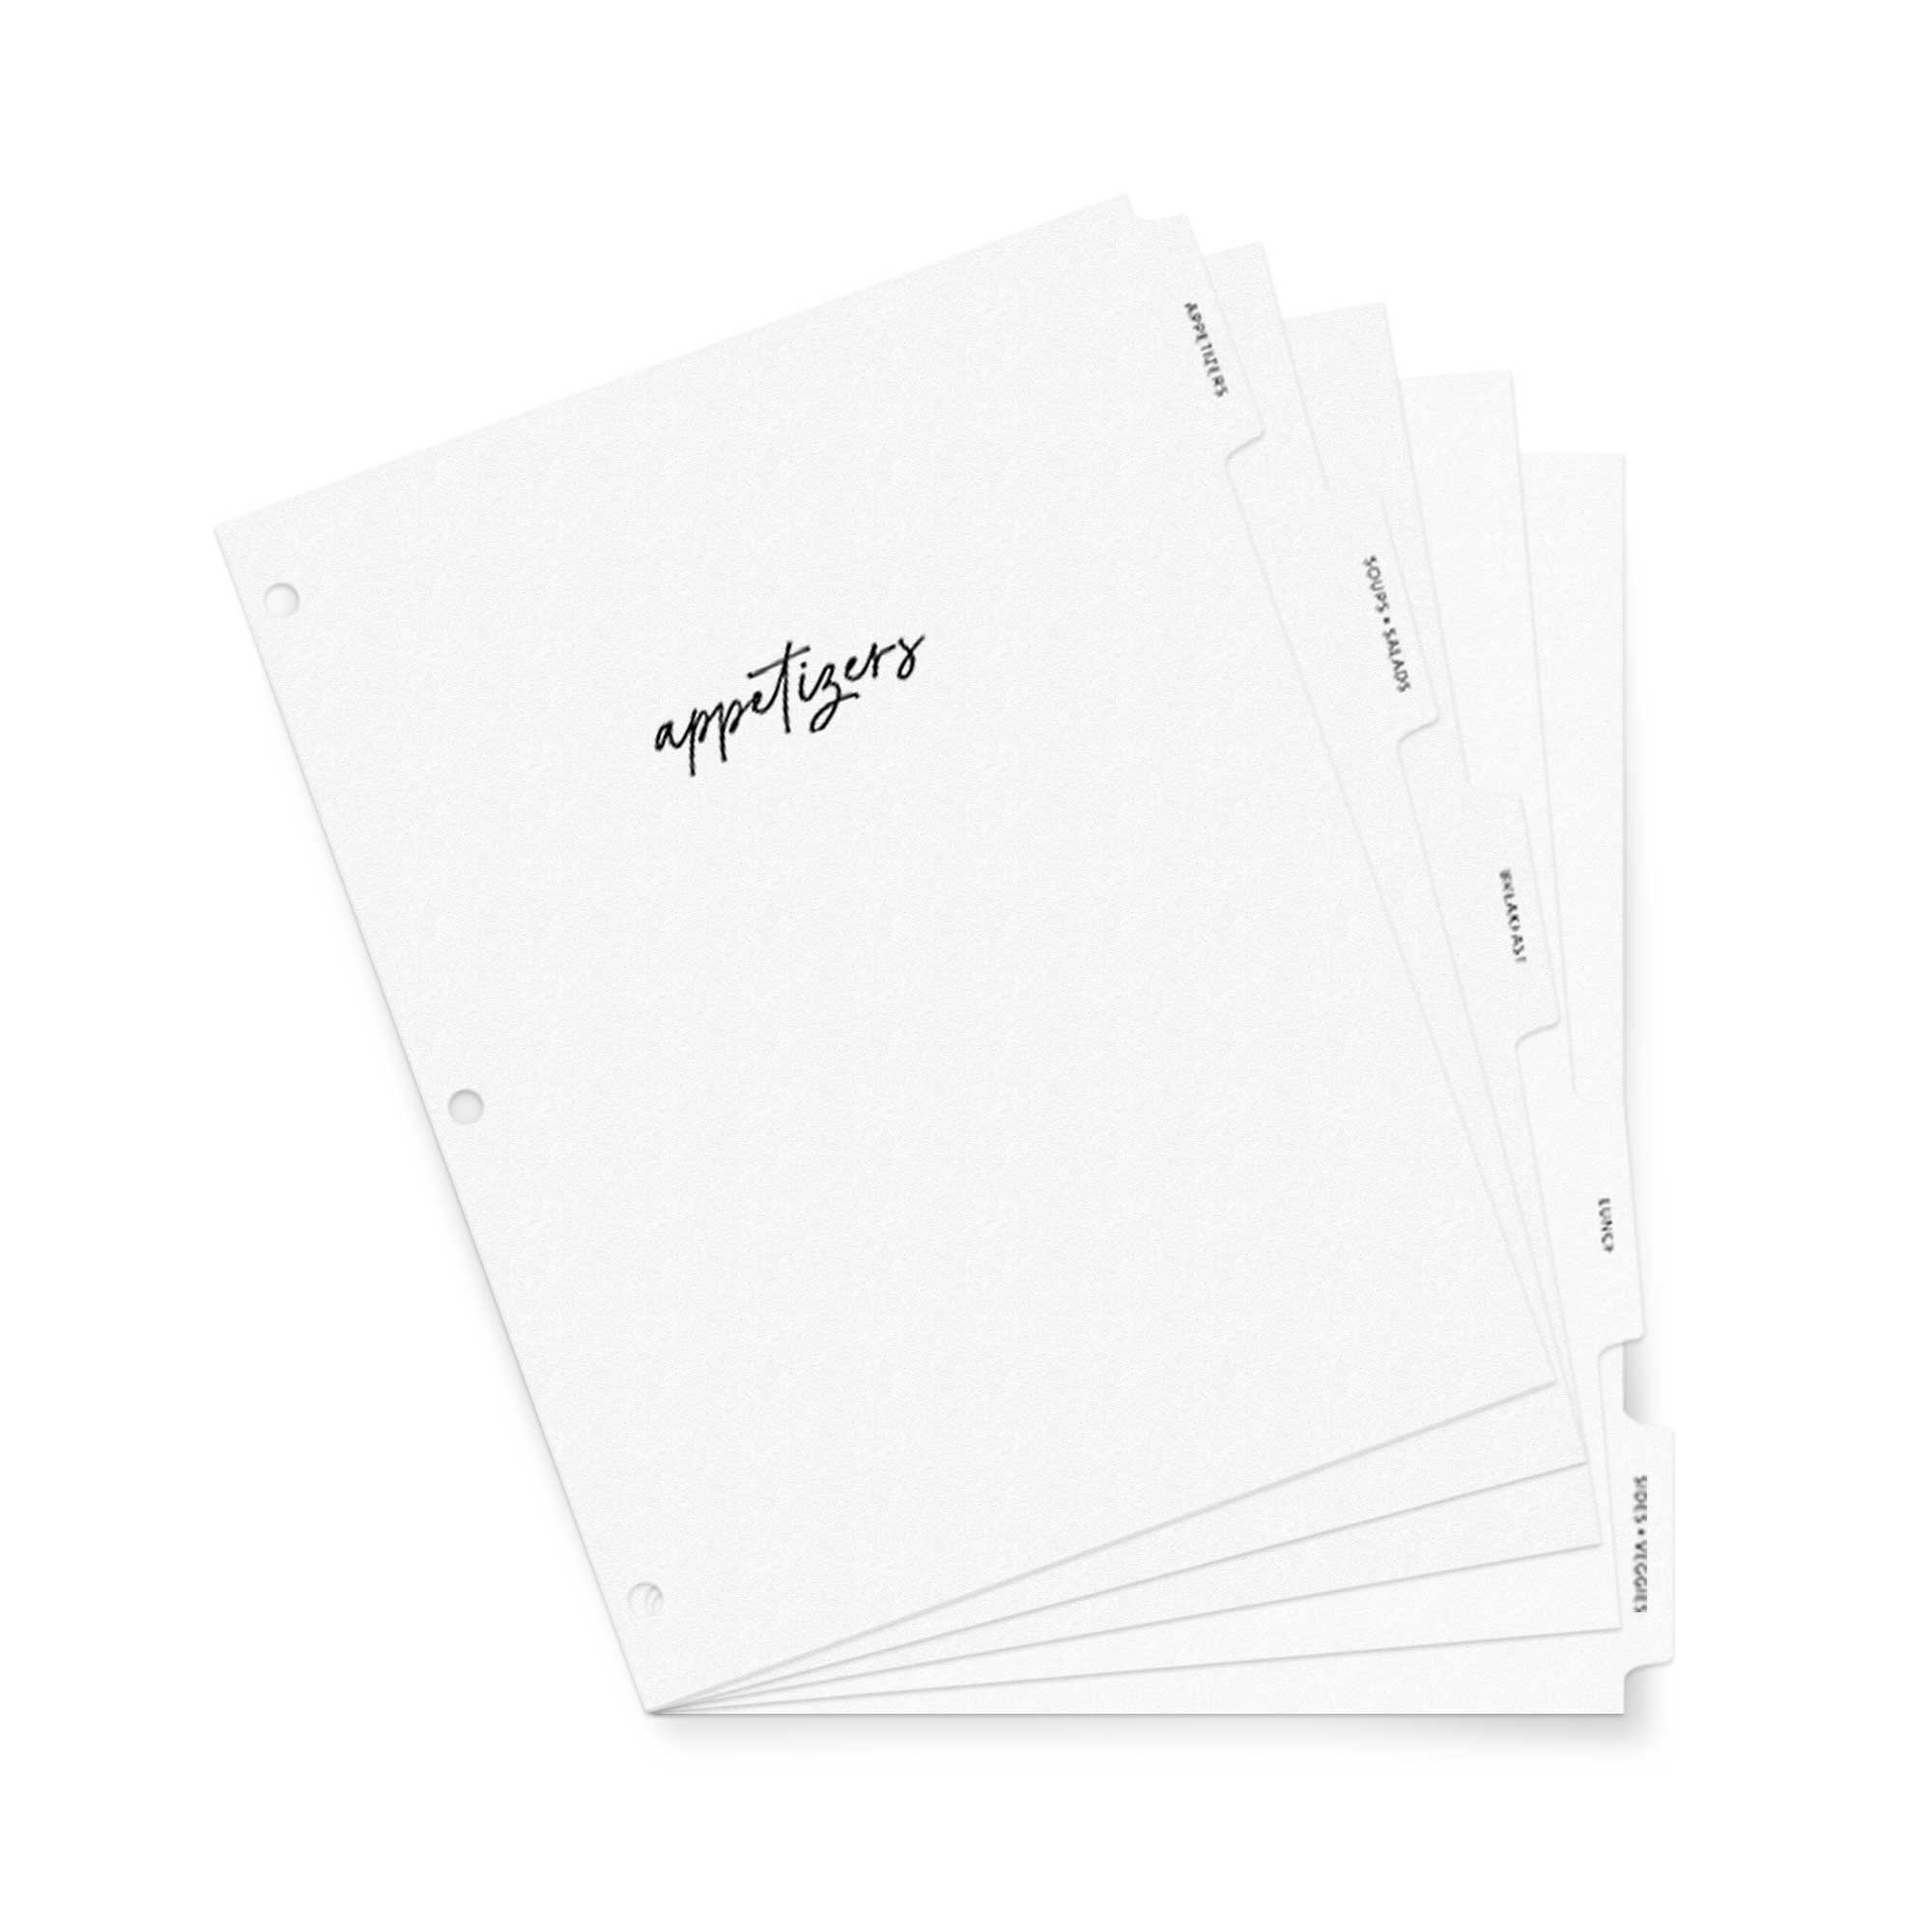 Custom binder tabs will help get your work projects, recipes or school work organized with style!